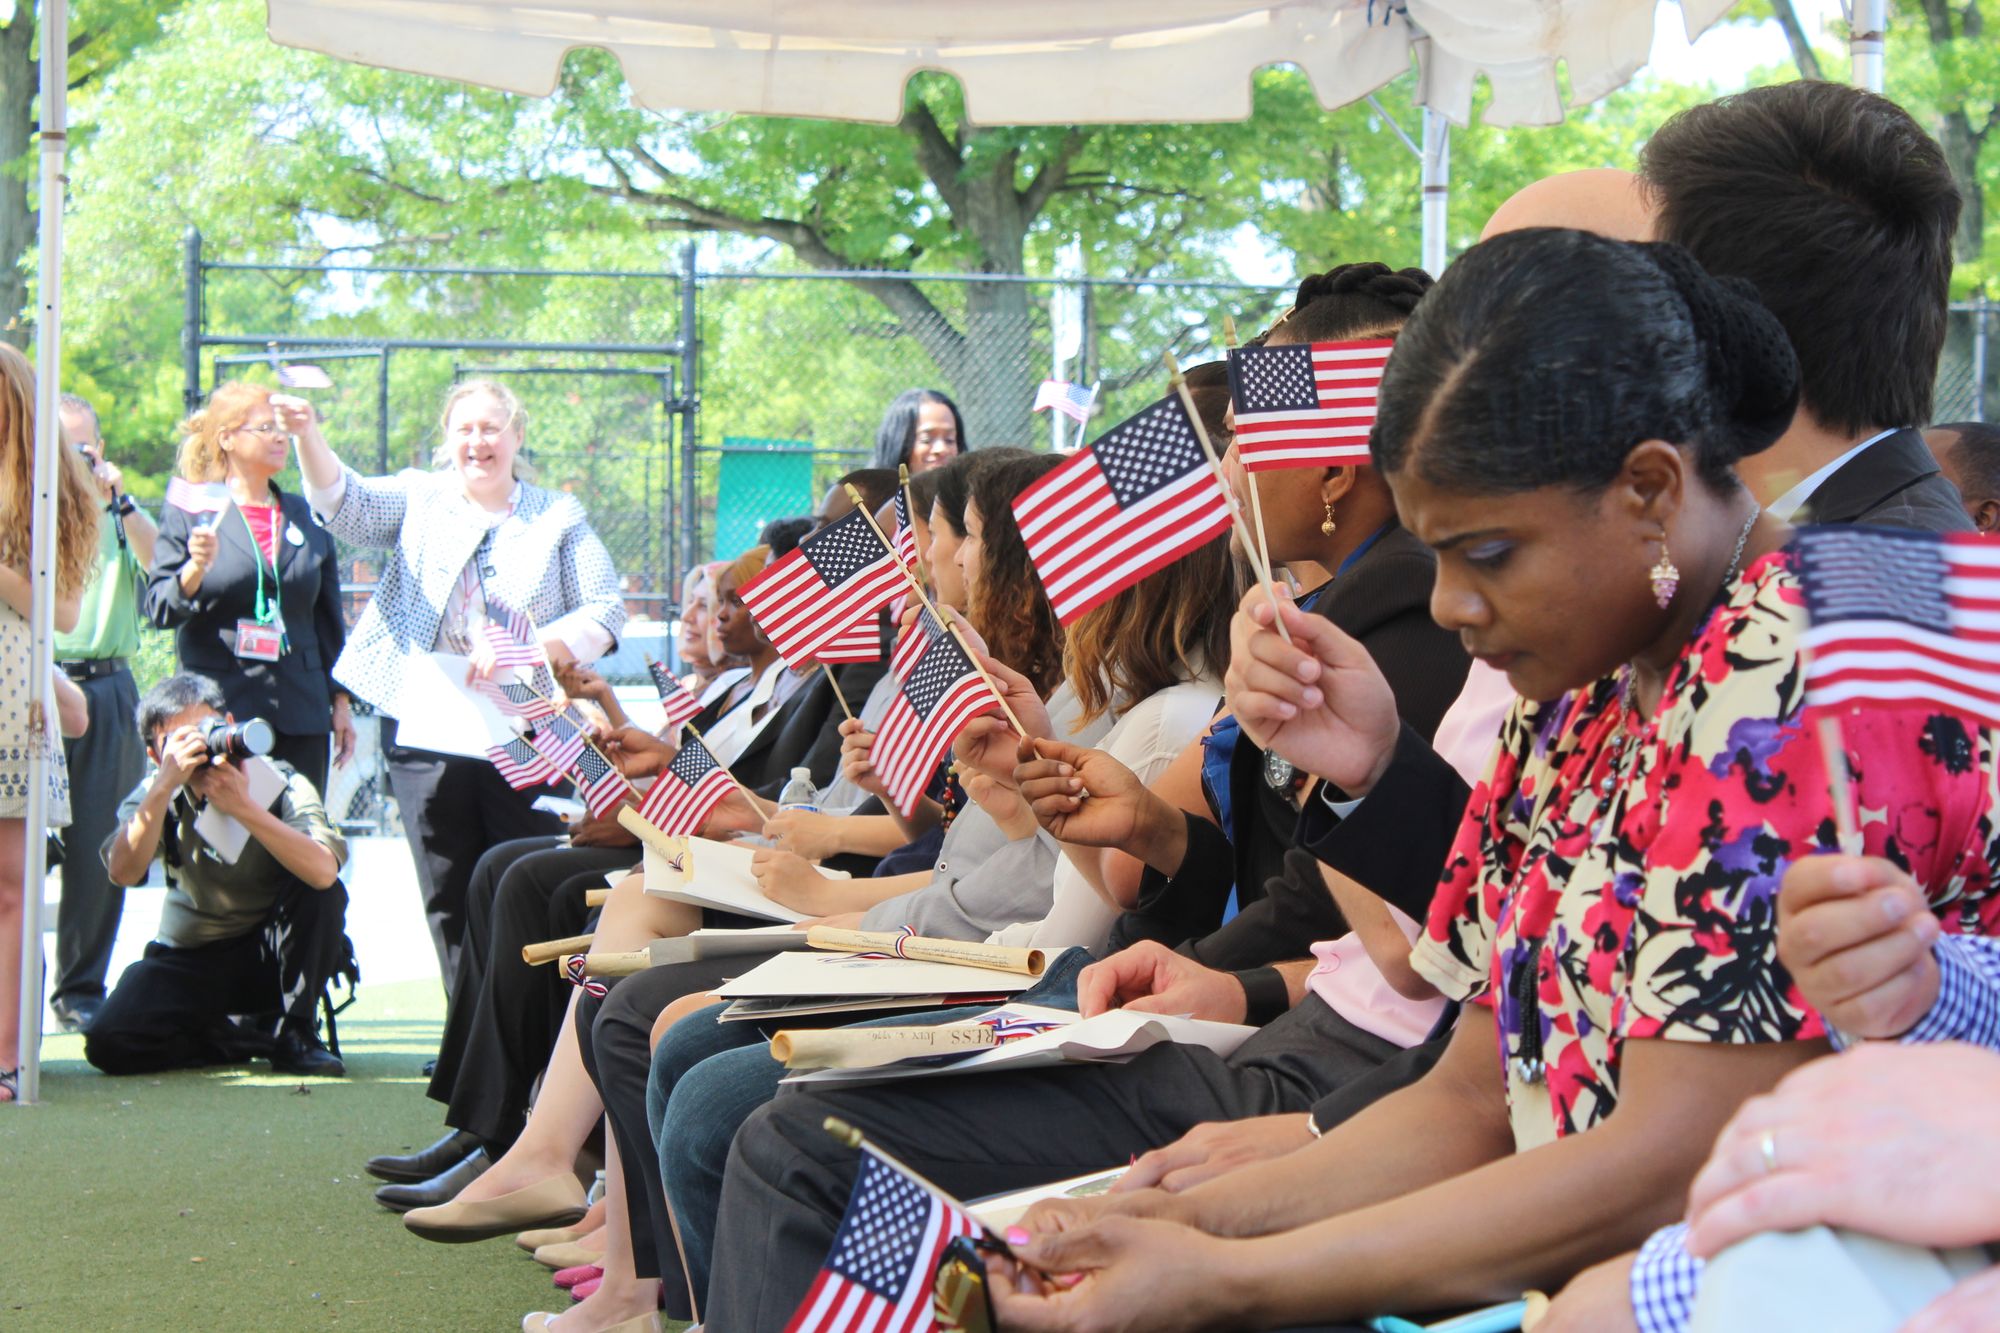 Twenty People Became American Citizens At Old Stone House Naturalization Ceremony